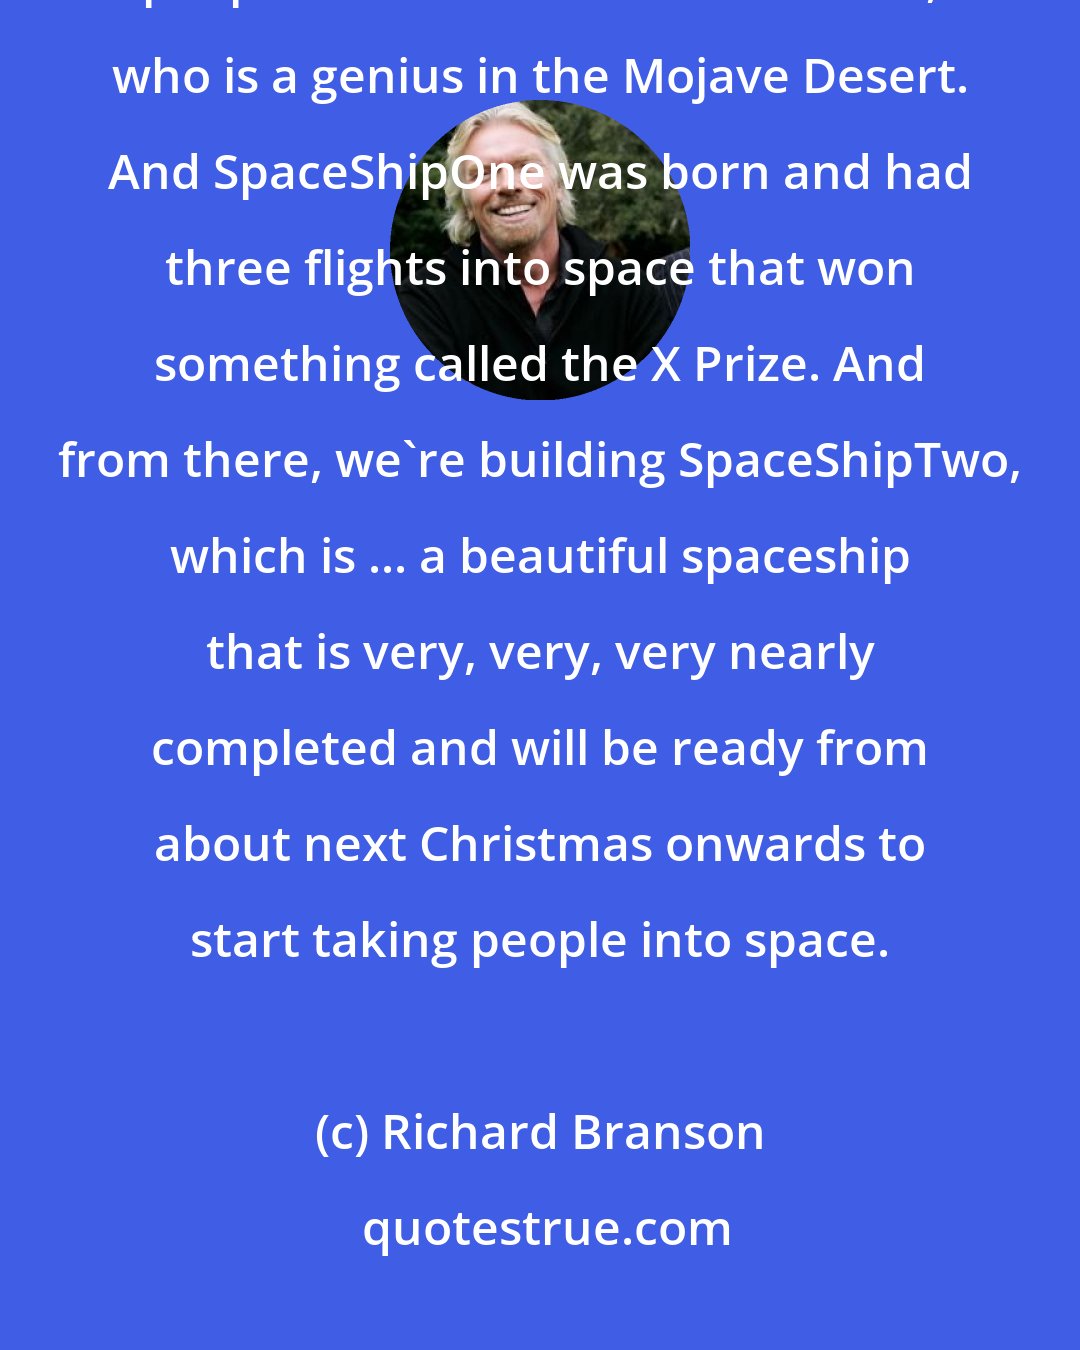 Richard Branson: I was fortunate enough, after many visits to many wonderful, weird people to come across Burt Rutan, who is a genius in the Mojave Desert. And SpaceShipOne was born and had three flights into space that won something called the X Prize. And from there, we're building SpaceShipTwo, which is ... a beautiful spaceship that is very, very, very nearly completed and will be ready from about next Christmas onwards to start taking people into space.